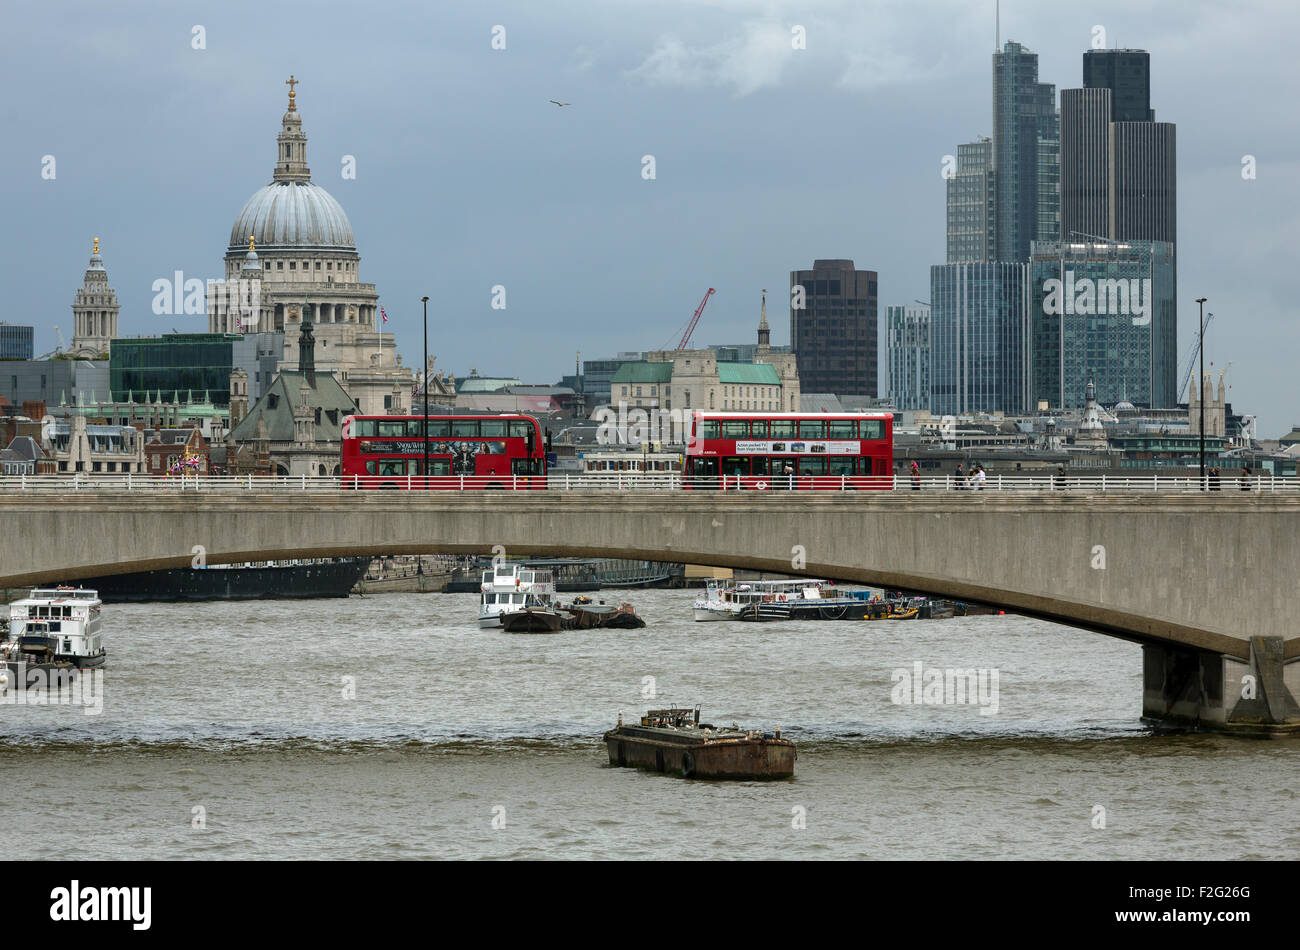 04.06.2012, London, Greater London, United Kingdom - View towards the City of London across the Thames with the Saint Paul's Stock Photo